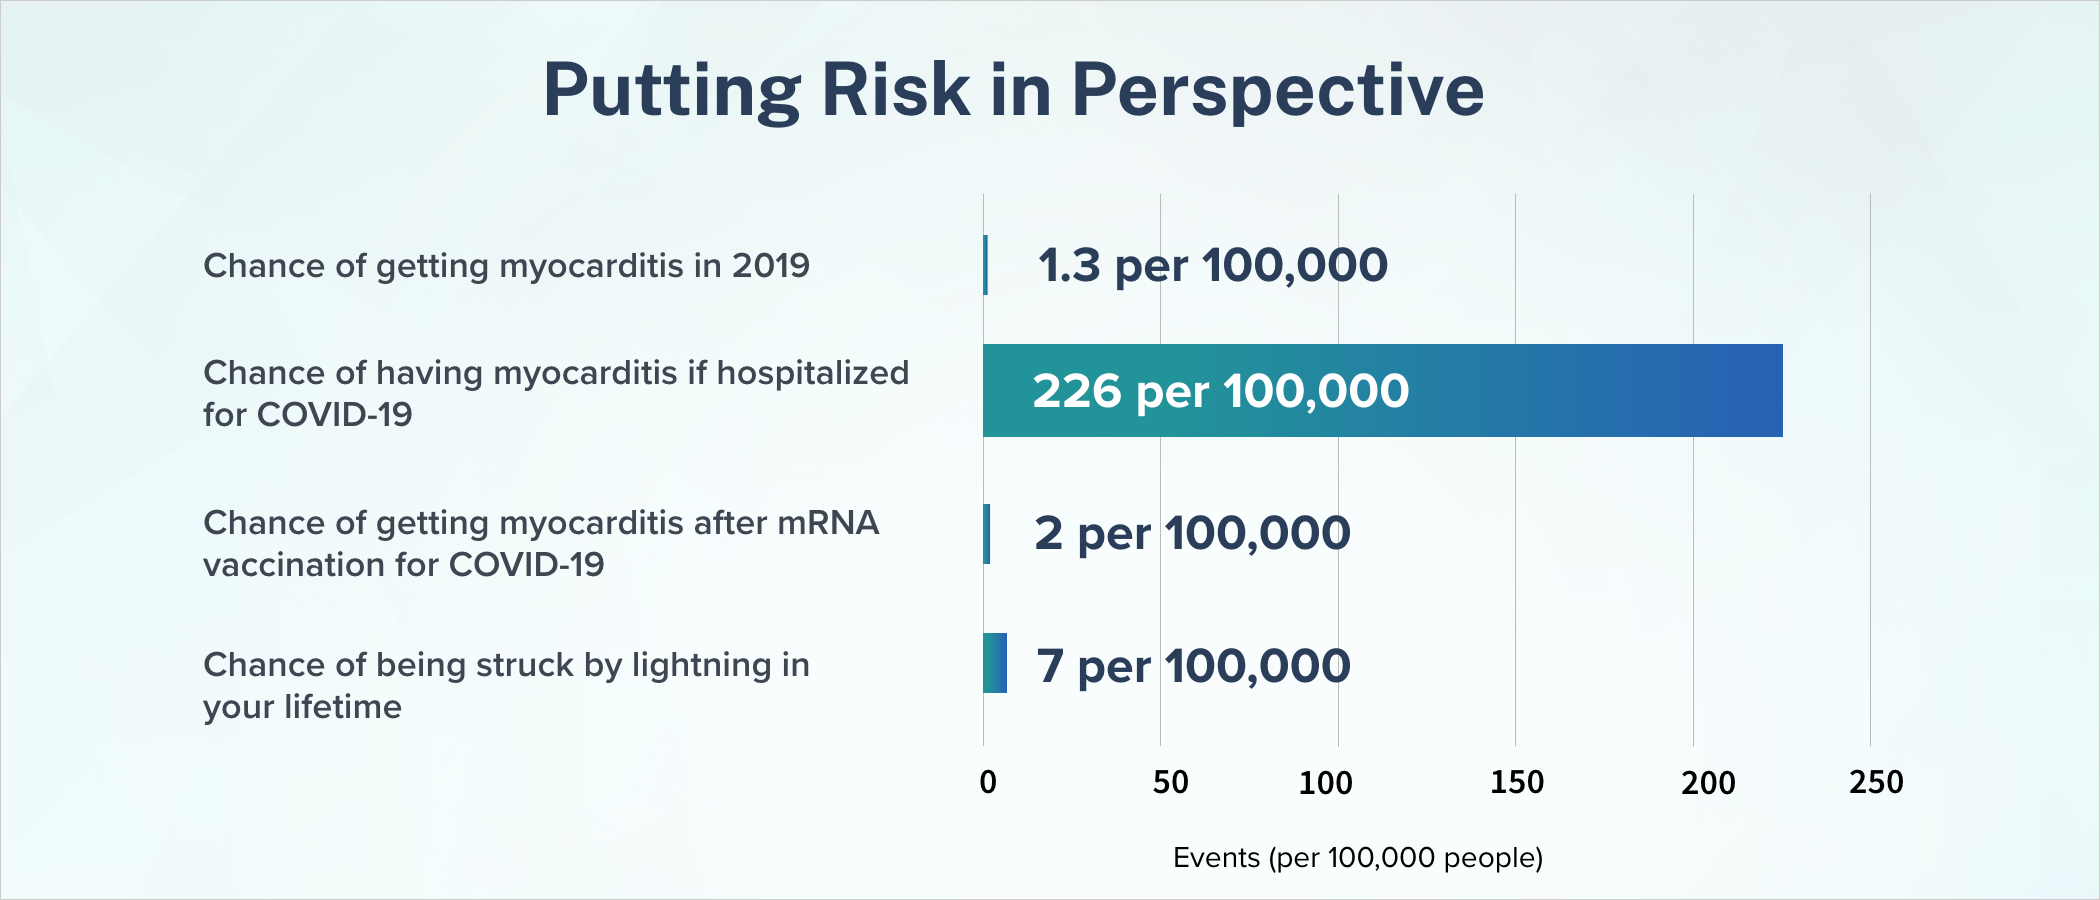 A bar chart shows risk levels of myocarditis from before the COVID-19 pandemic, after COVID-19 hospitalization, and after COVID-19 vaccination. Finally, the chart shows the risk of a lightning strike. 